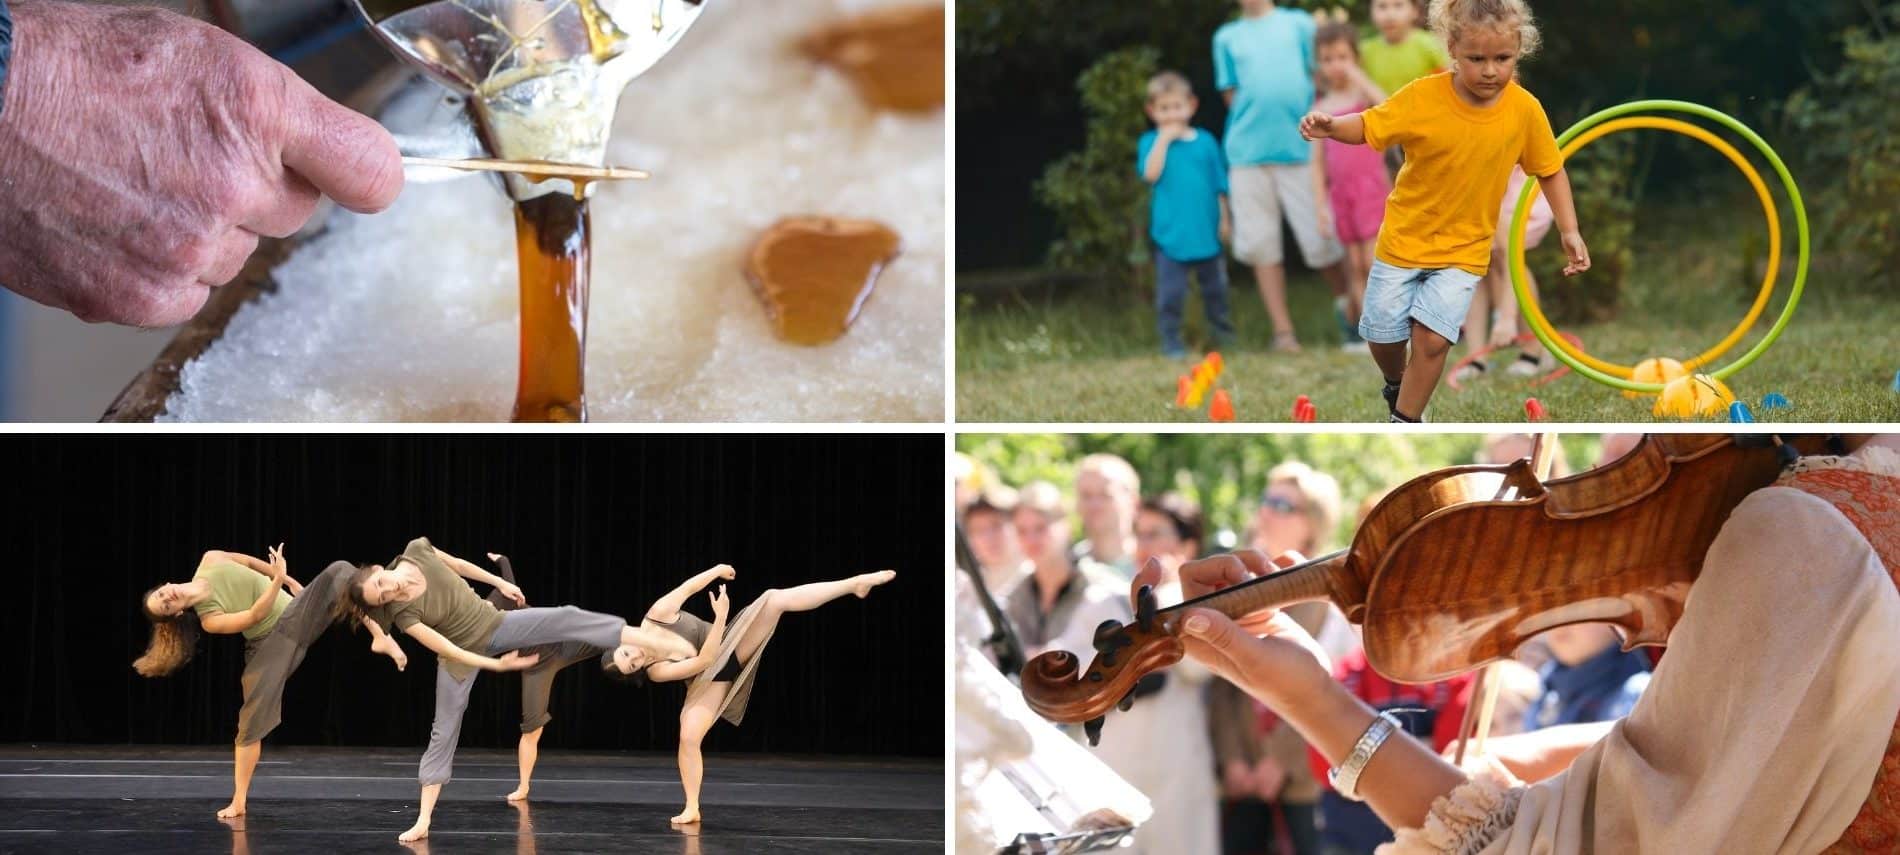 Collage of 4 photos: maple sugaring, some kids playing, some dancers performing, a street performer playing the fiddle